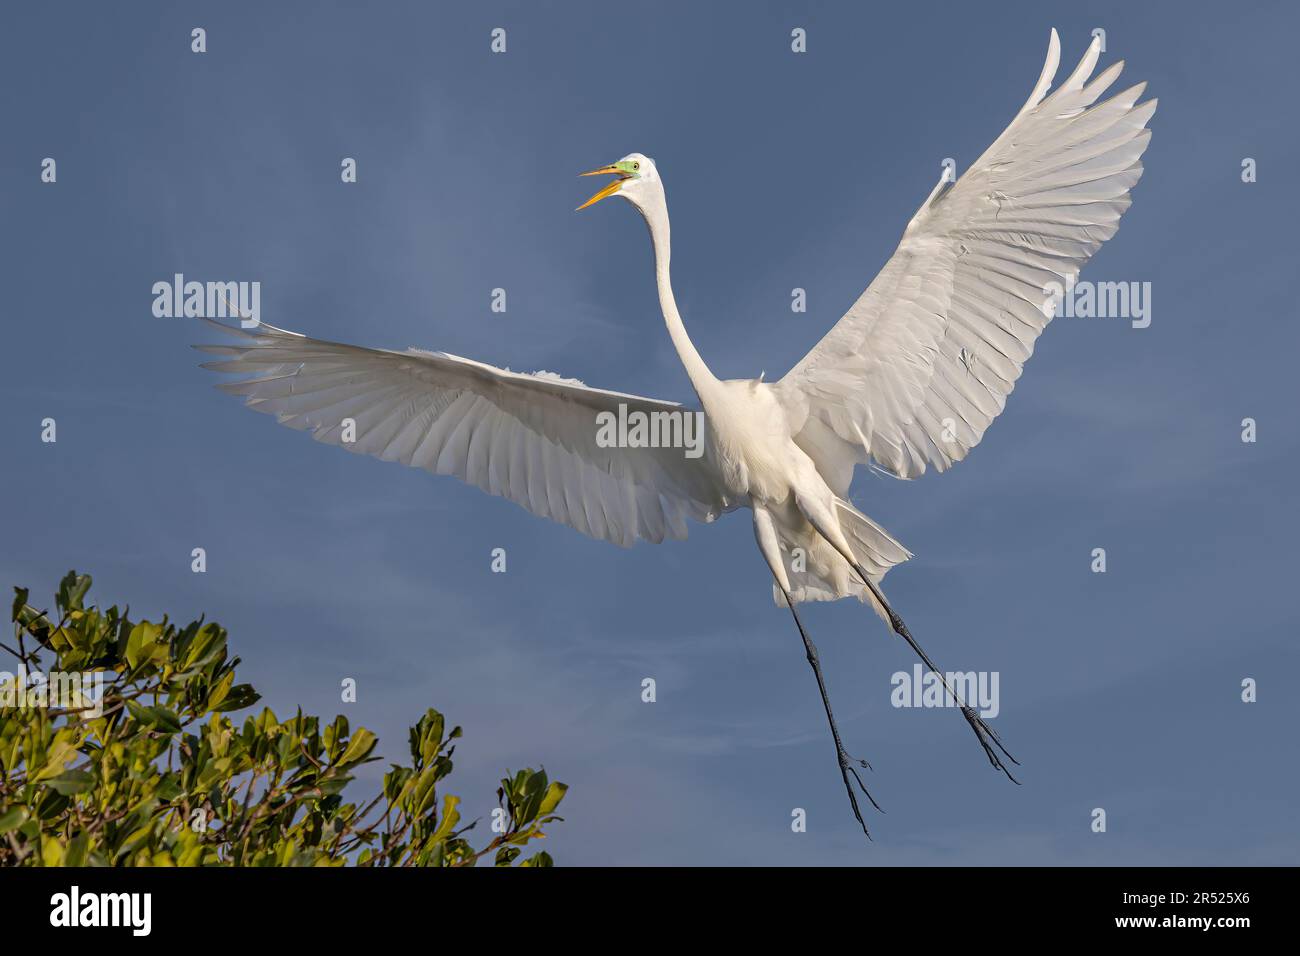 A Great Egret - Great Egret in flight returning to the nest.  The Great Egrets large wing span look almost angelica when spread out.  The large white Stock Photo